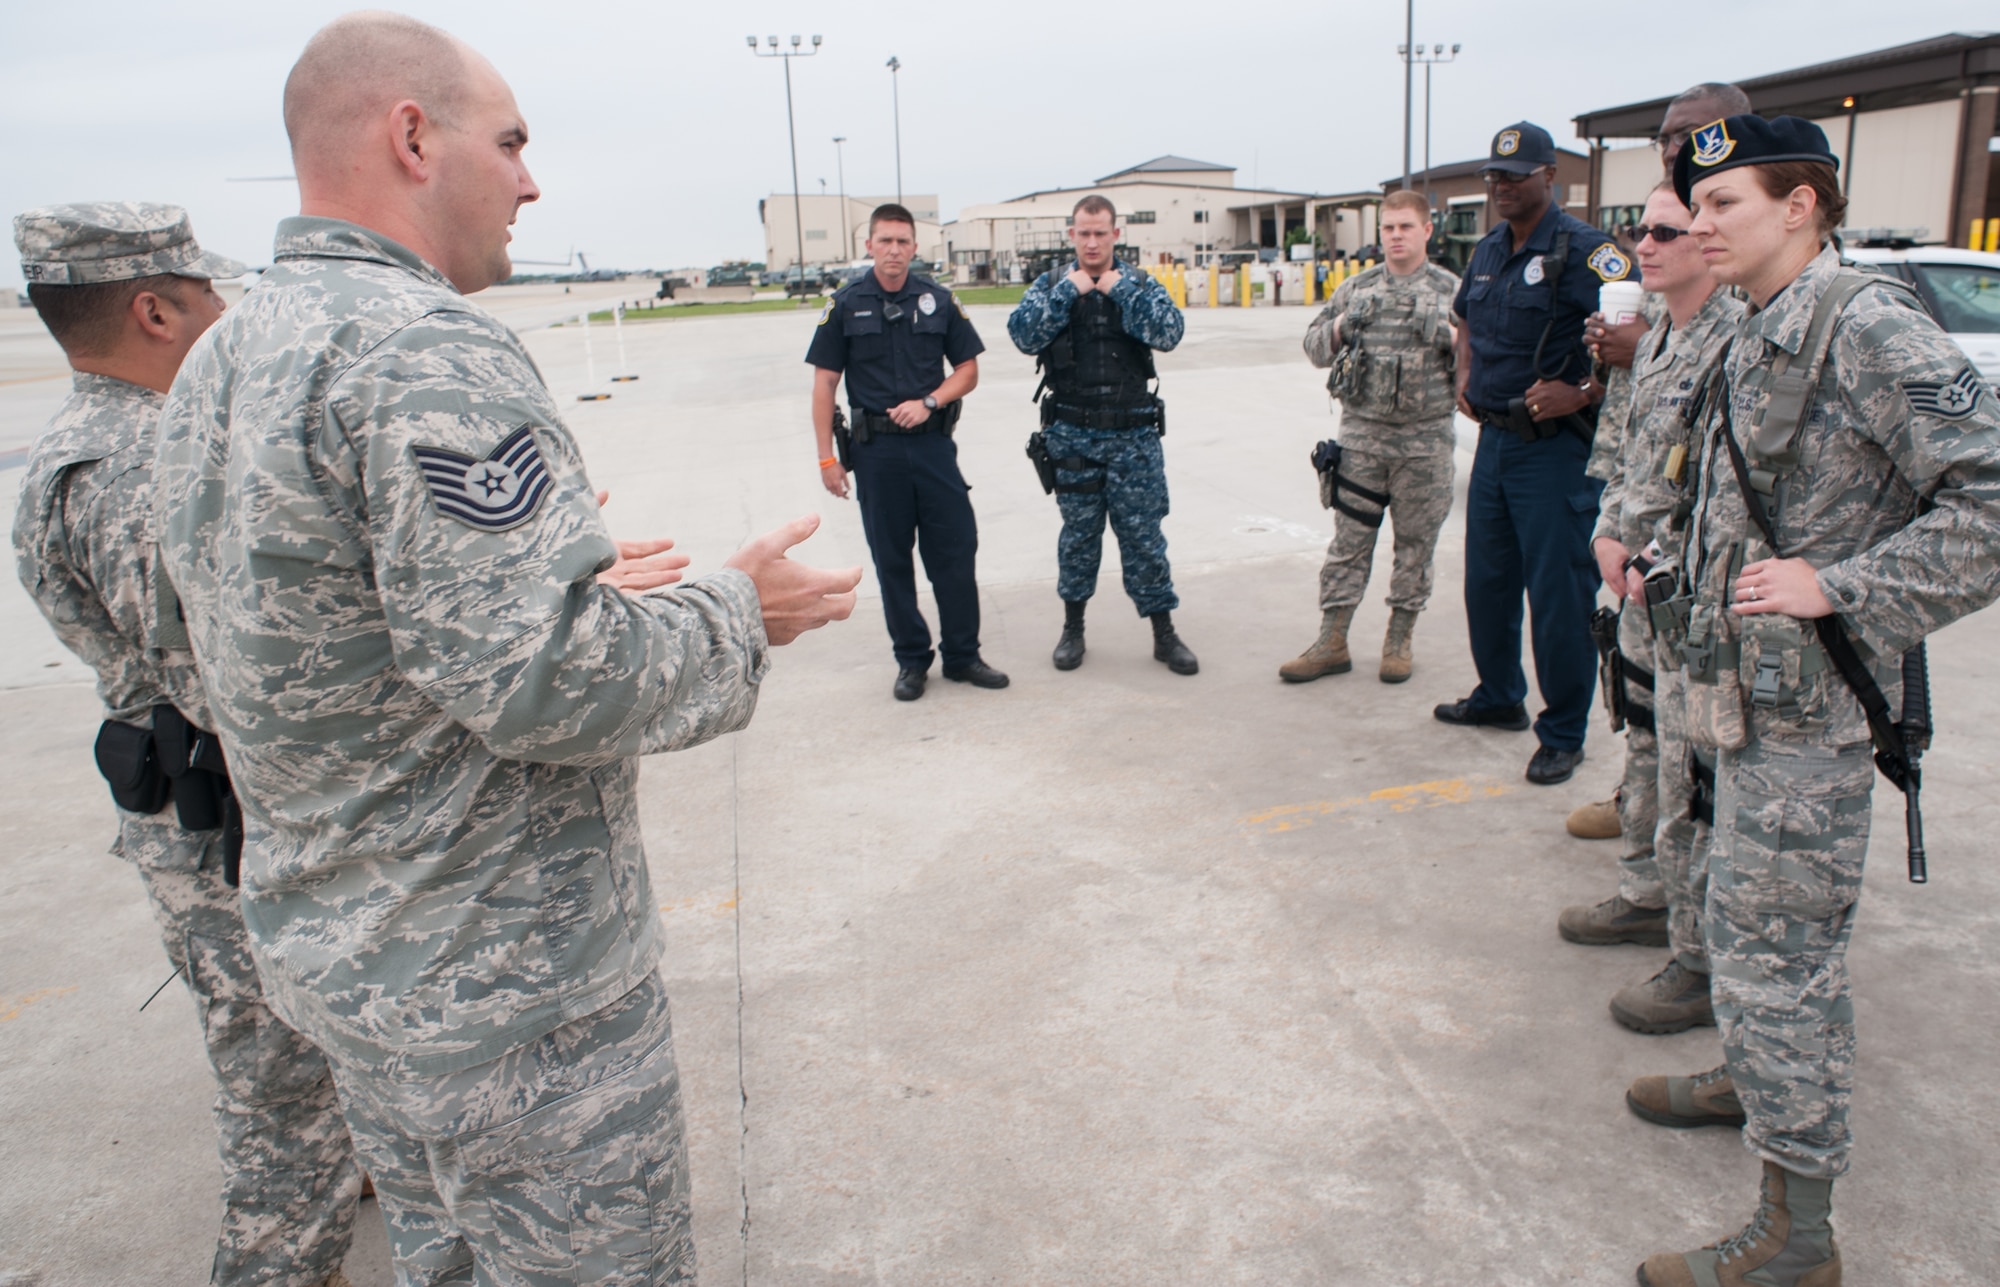 Tech. Sgt. Joshua White, 87th Security Forces Squadron flight chief, goes over his observations from the flightline training conducted with 87th SFS members and Army reservists from the 313th Military Police Detachment based in Las Vegas June 14, 2013, at Joint Base McGuire-Dix-Lakehurst, N.J. The Soldiers were conducting their annual training at JB MDL. (U.S. Air Force photo by Russ Meseroll/Released)